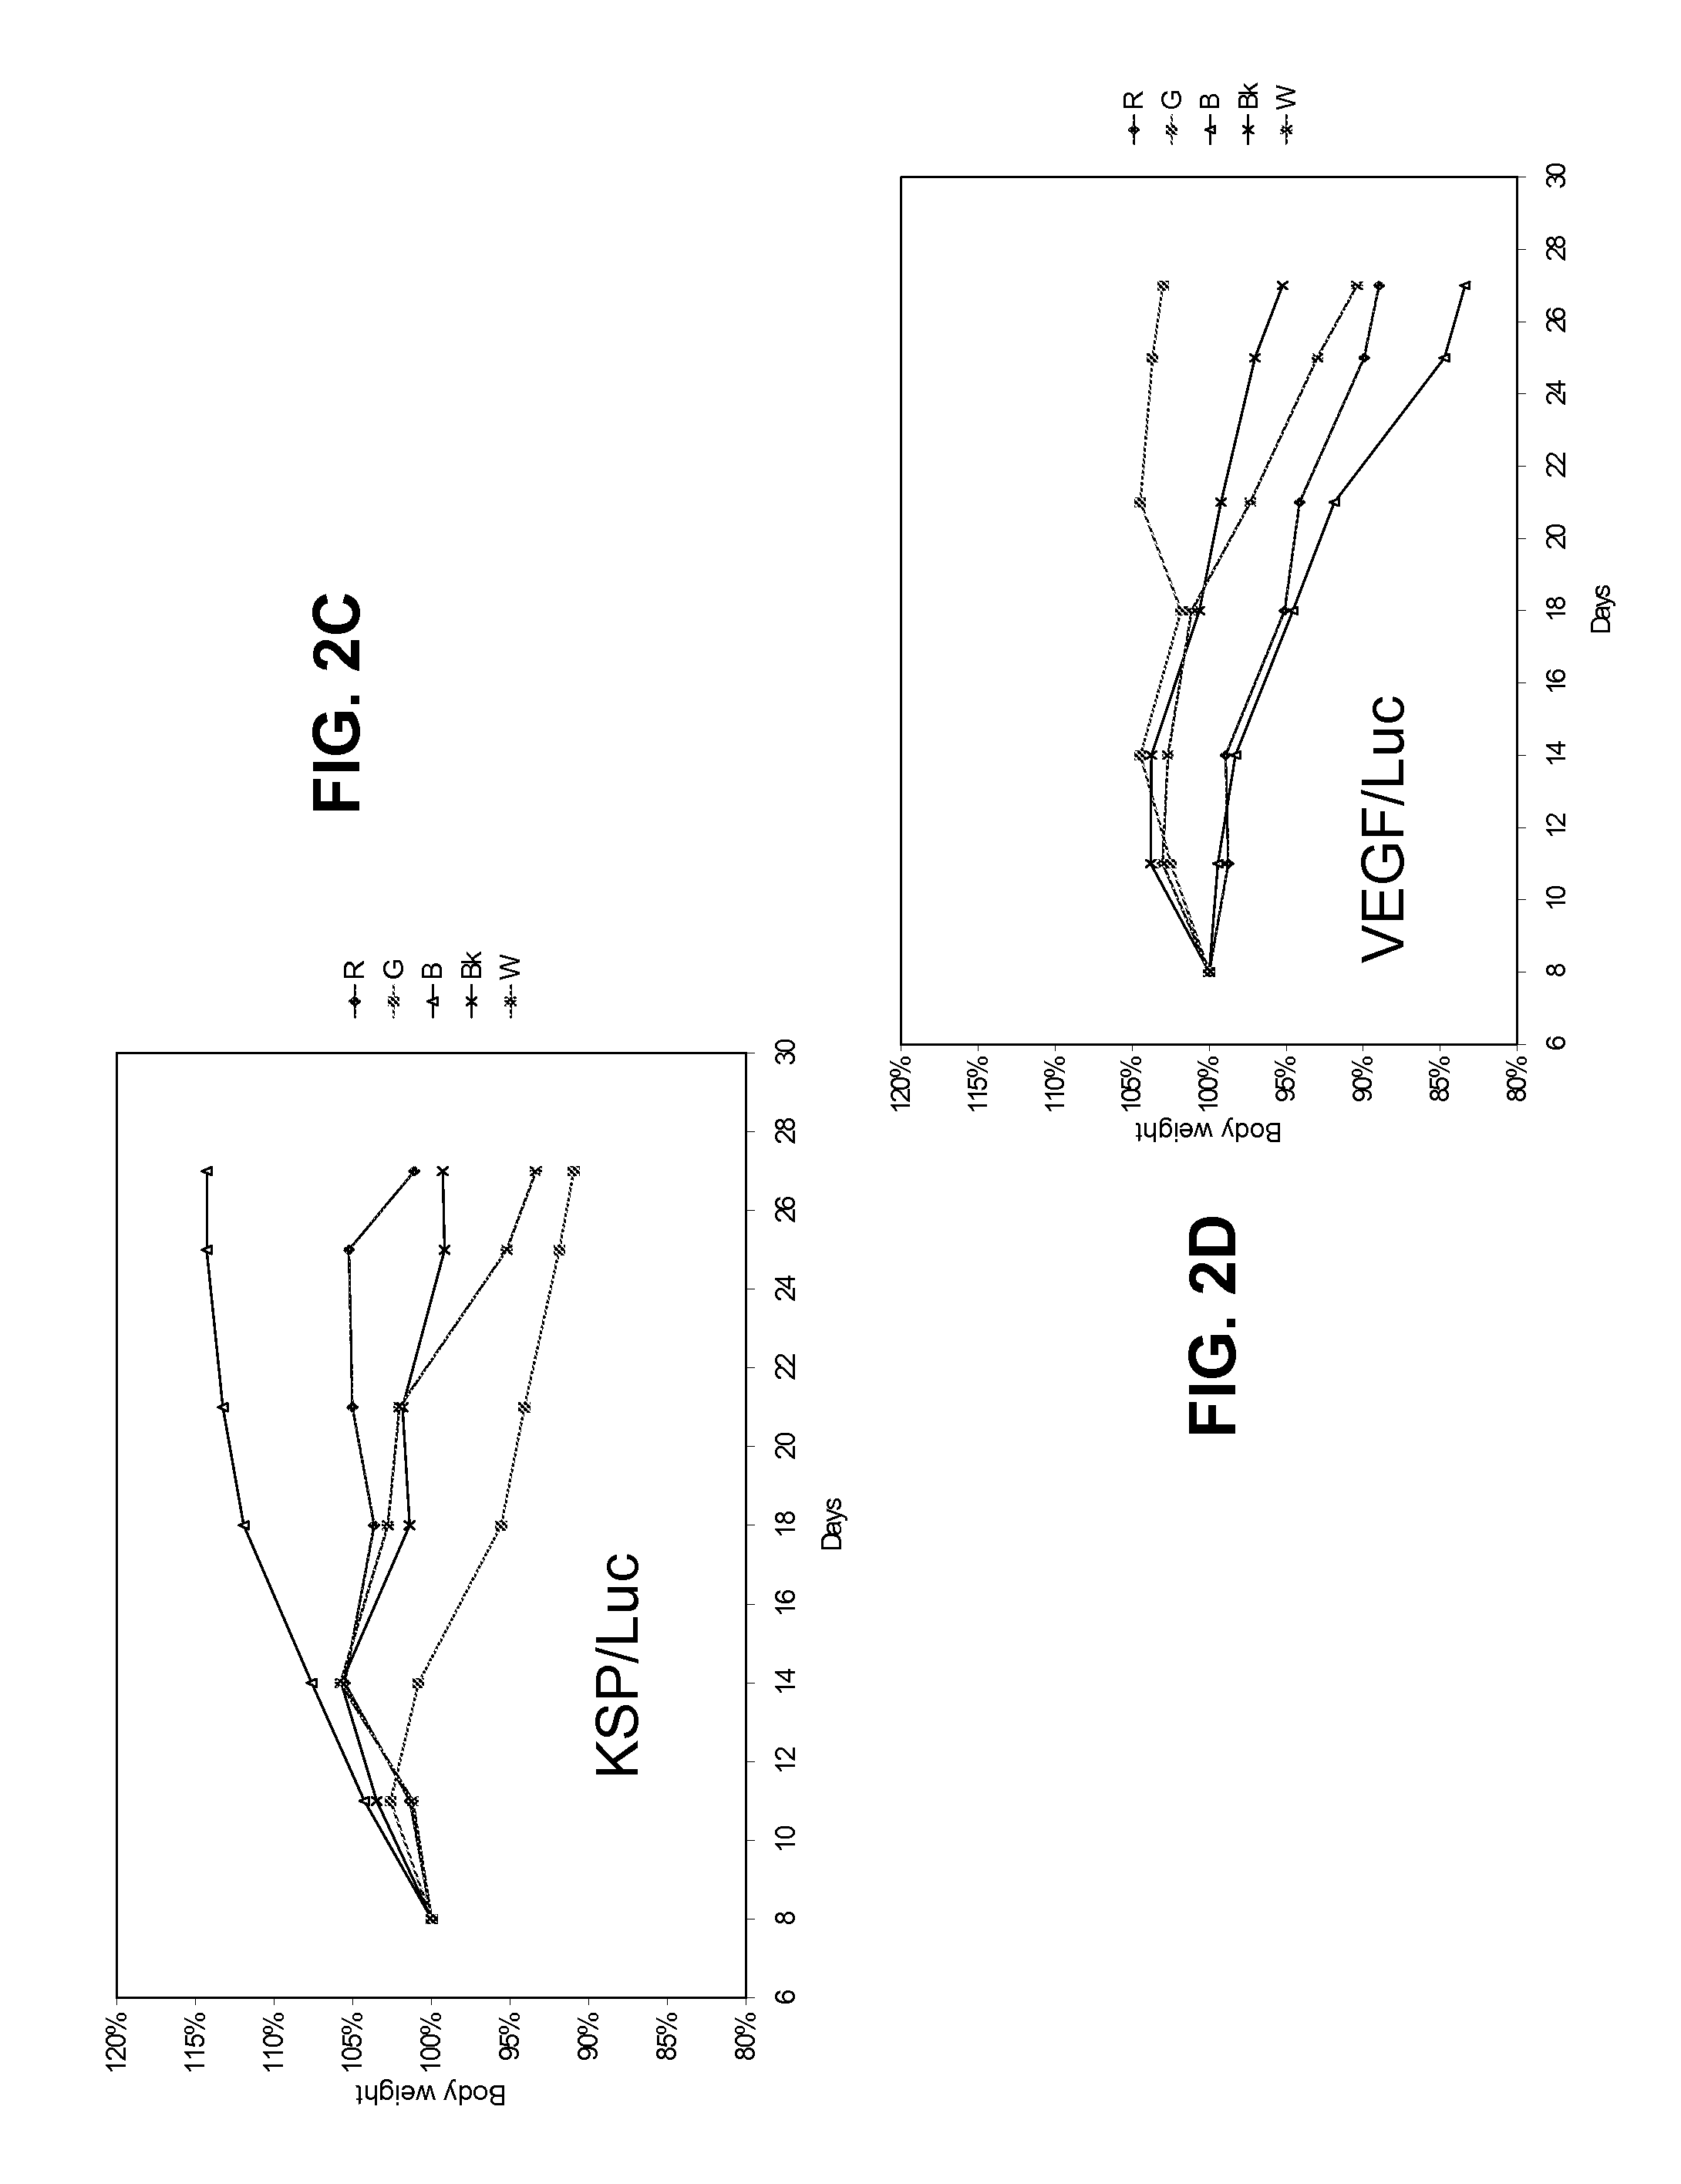 LIPID FORMULATED COMPOSITIONS AND METHODS FOR INHIBITING EXPRESSION OF Eg5 AND VEGF GENES